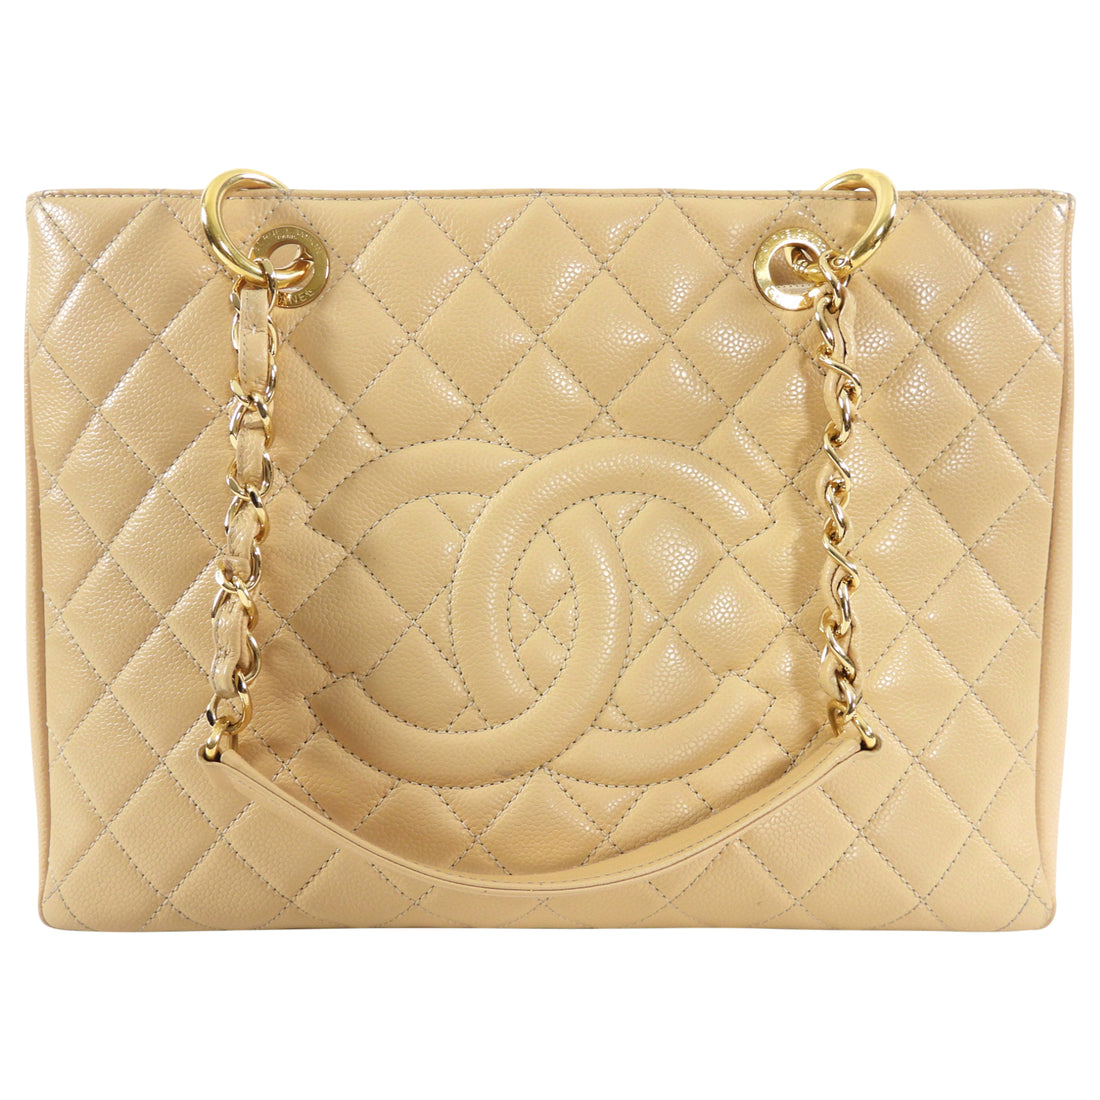 CHANEL GST Leather Exterior Tote Bags & Handbags for Women for